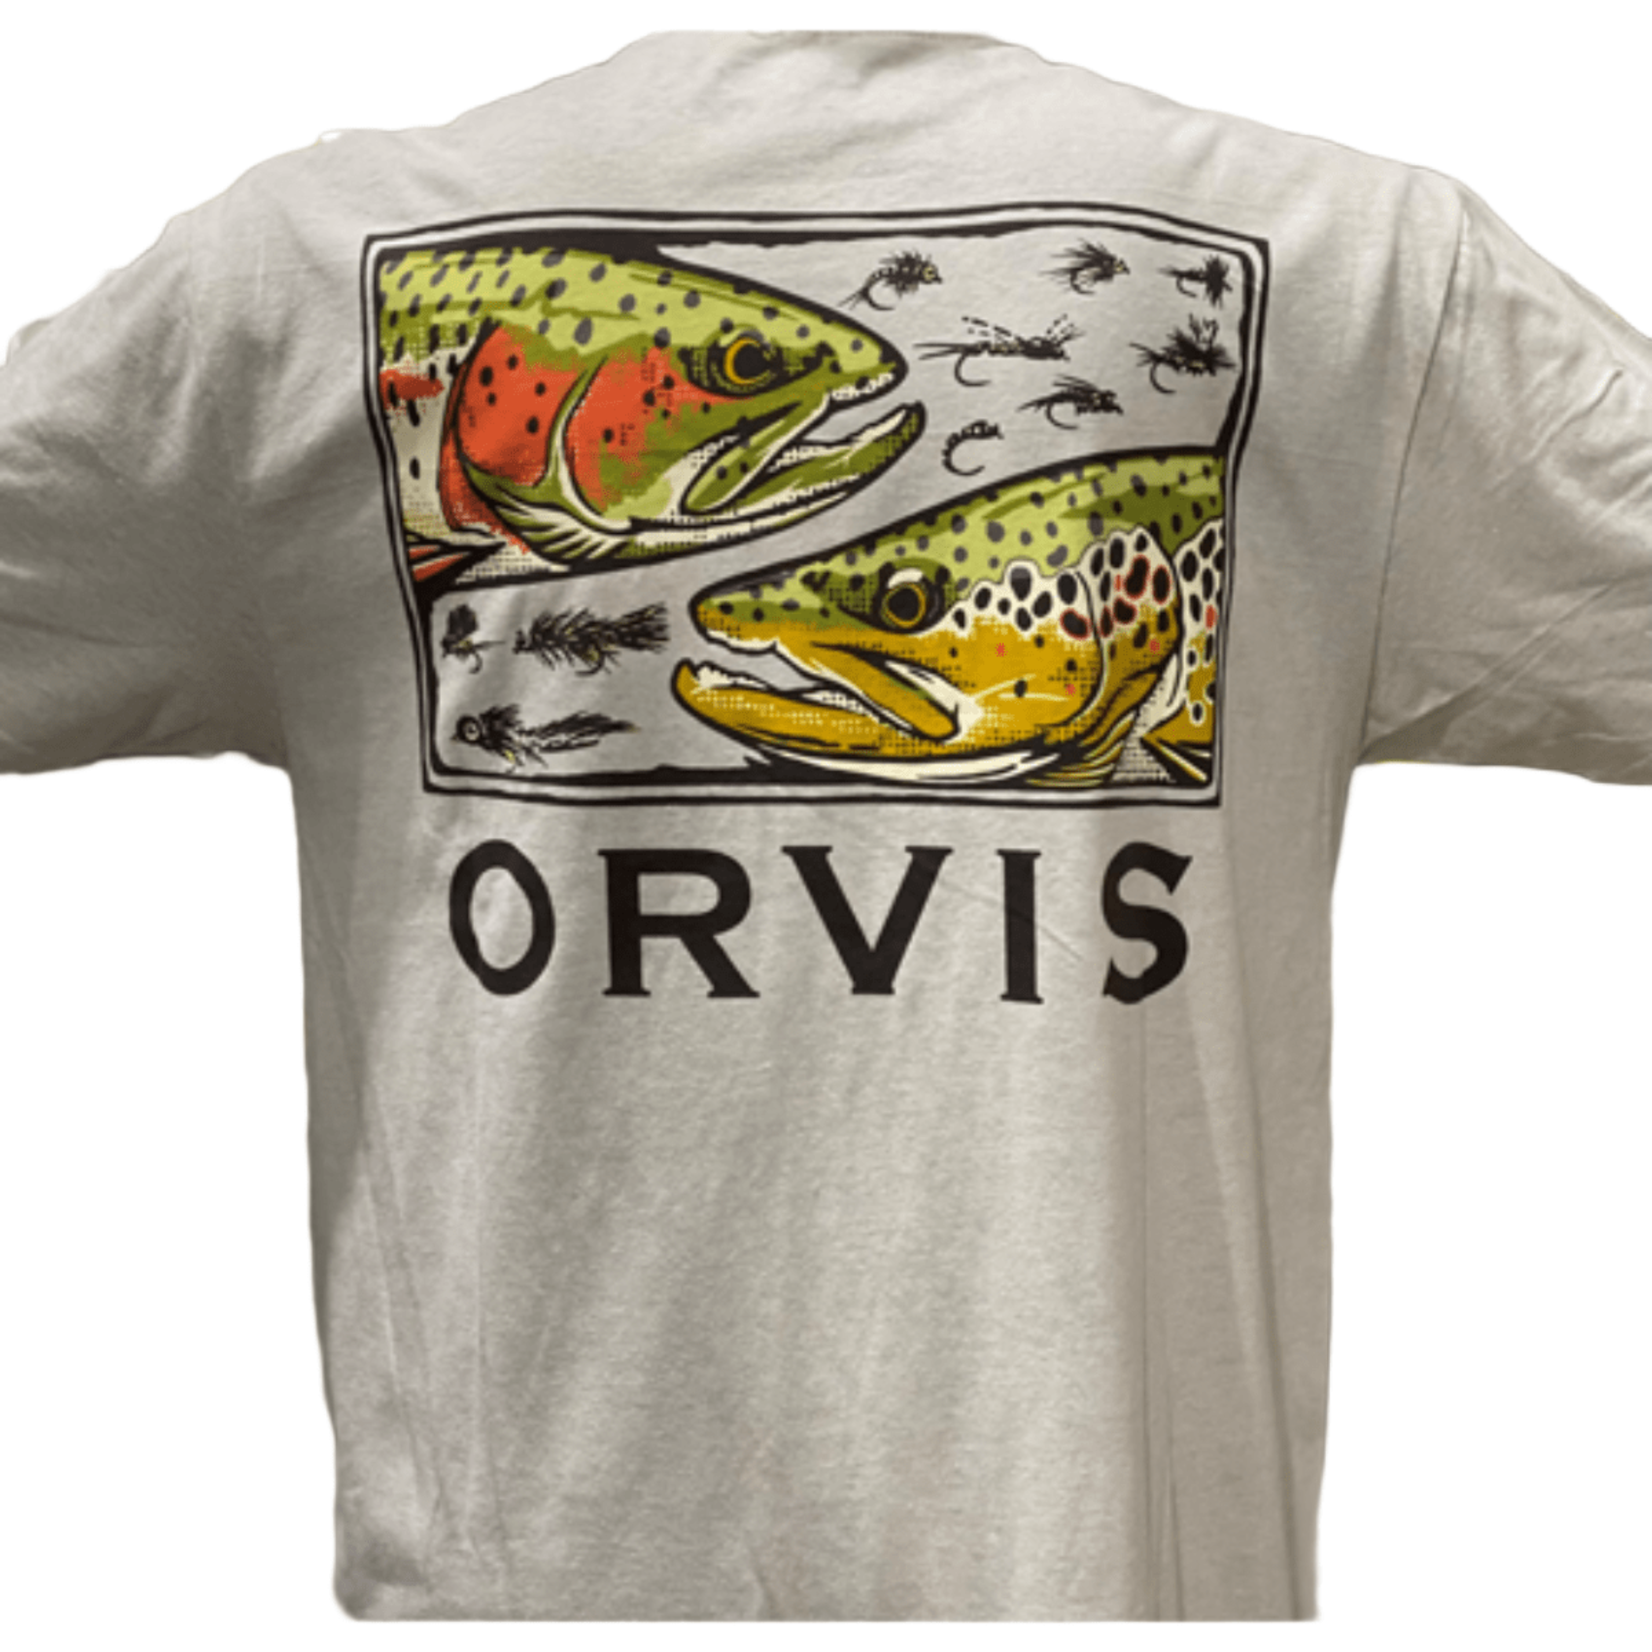 Men's Tie Your Own Fishing Flies T-Shirt | Cardinal | Size Large | Cotton/Polyester | Orvis